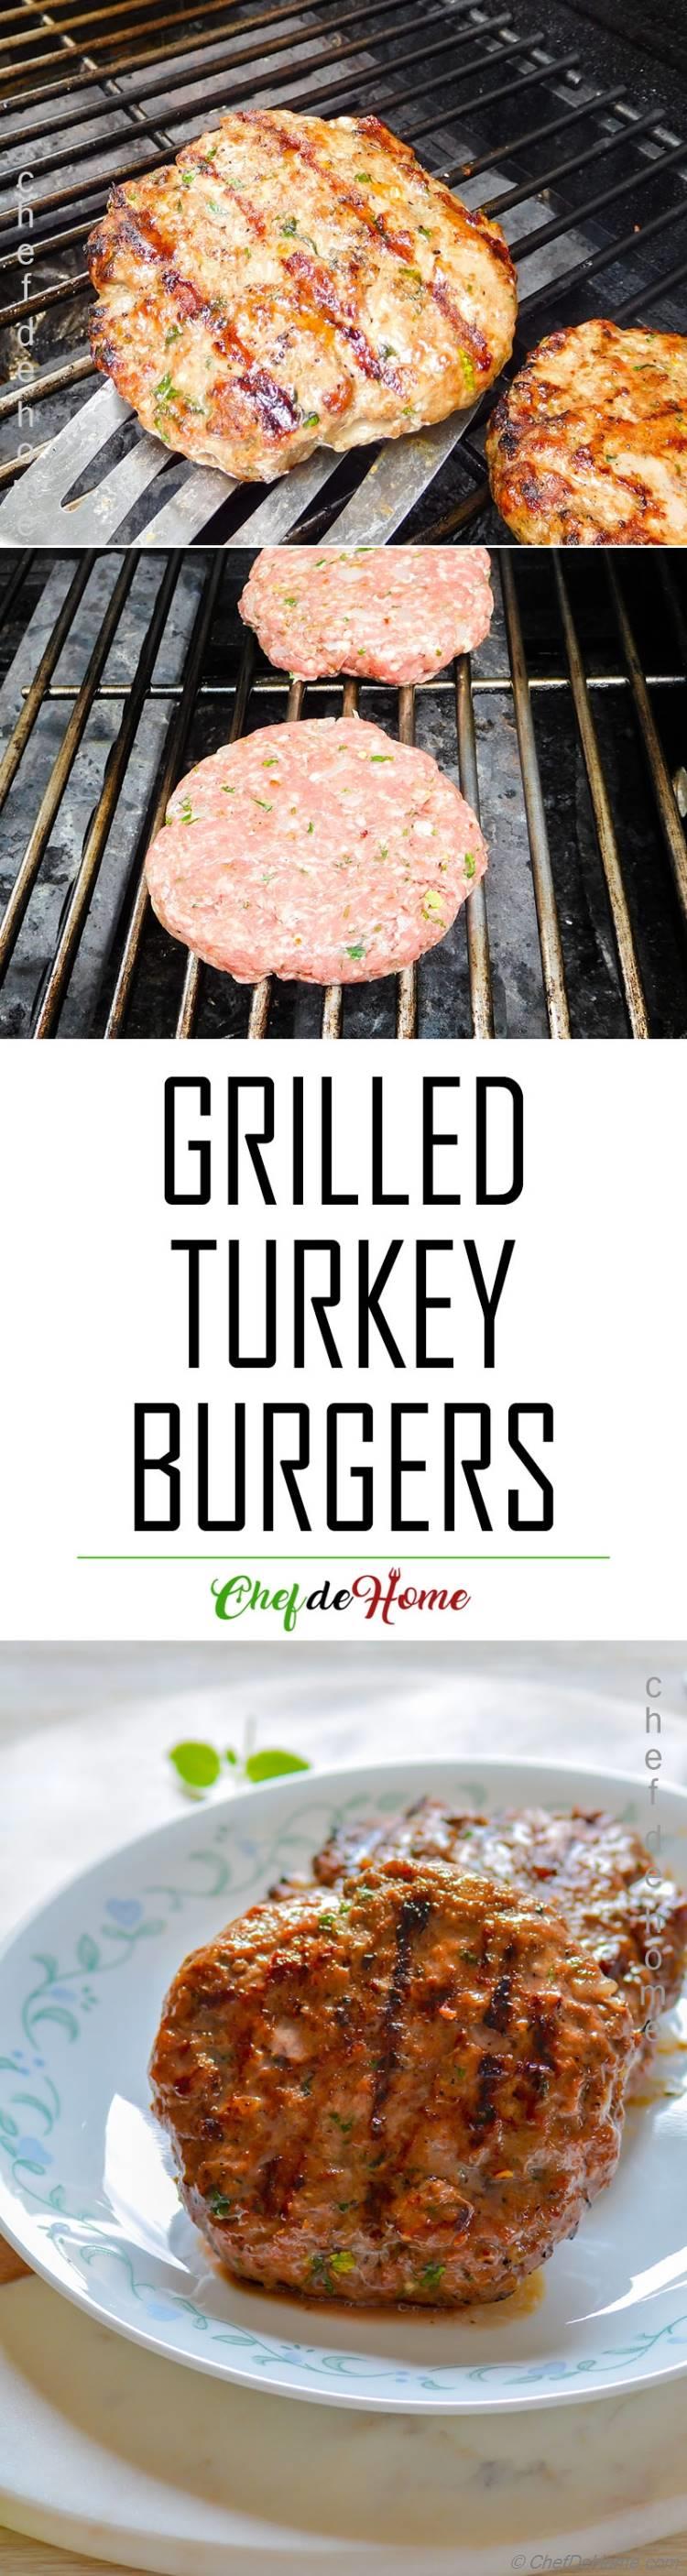 How to make Grilled Turkey Burgers